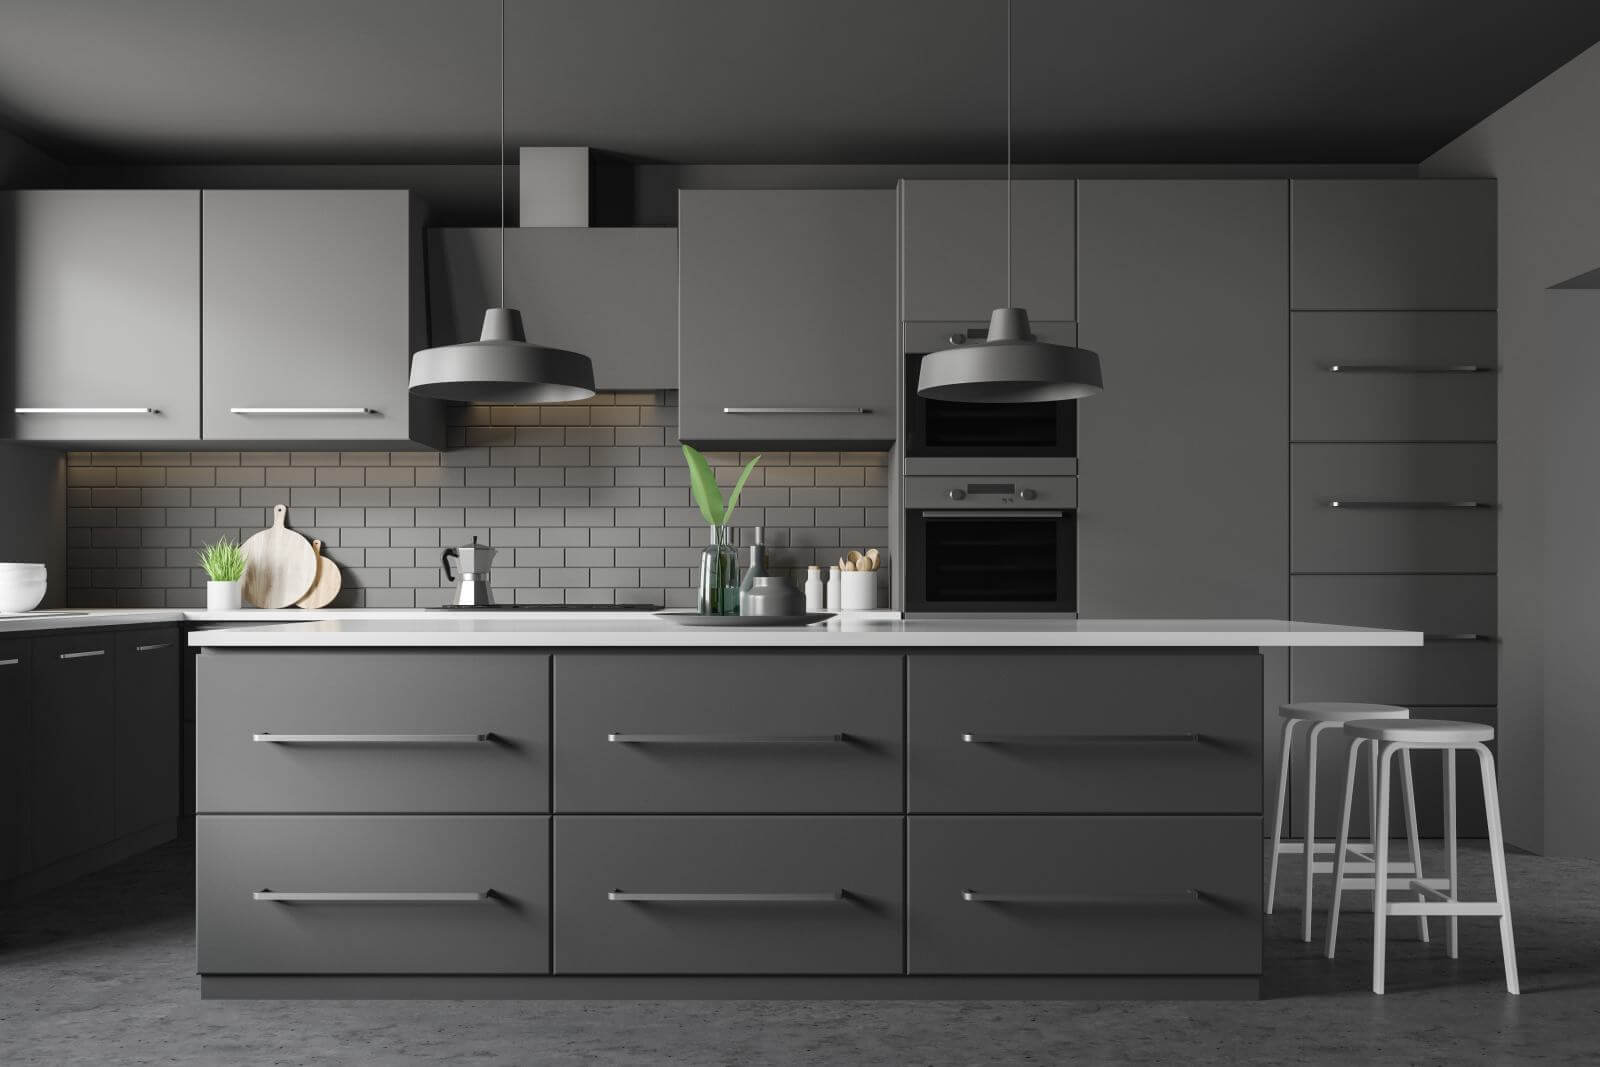 Interior of modern kitchen with dark grey and brick walls, concrete floor, grey countertops and bar with stools and comfortable cupboards. 3d erndering